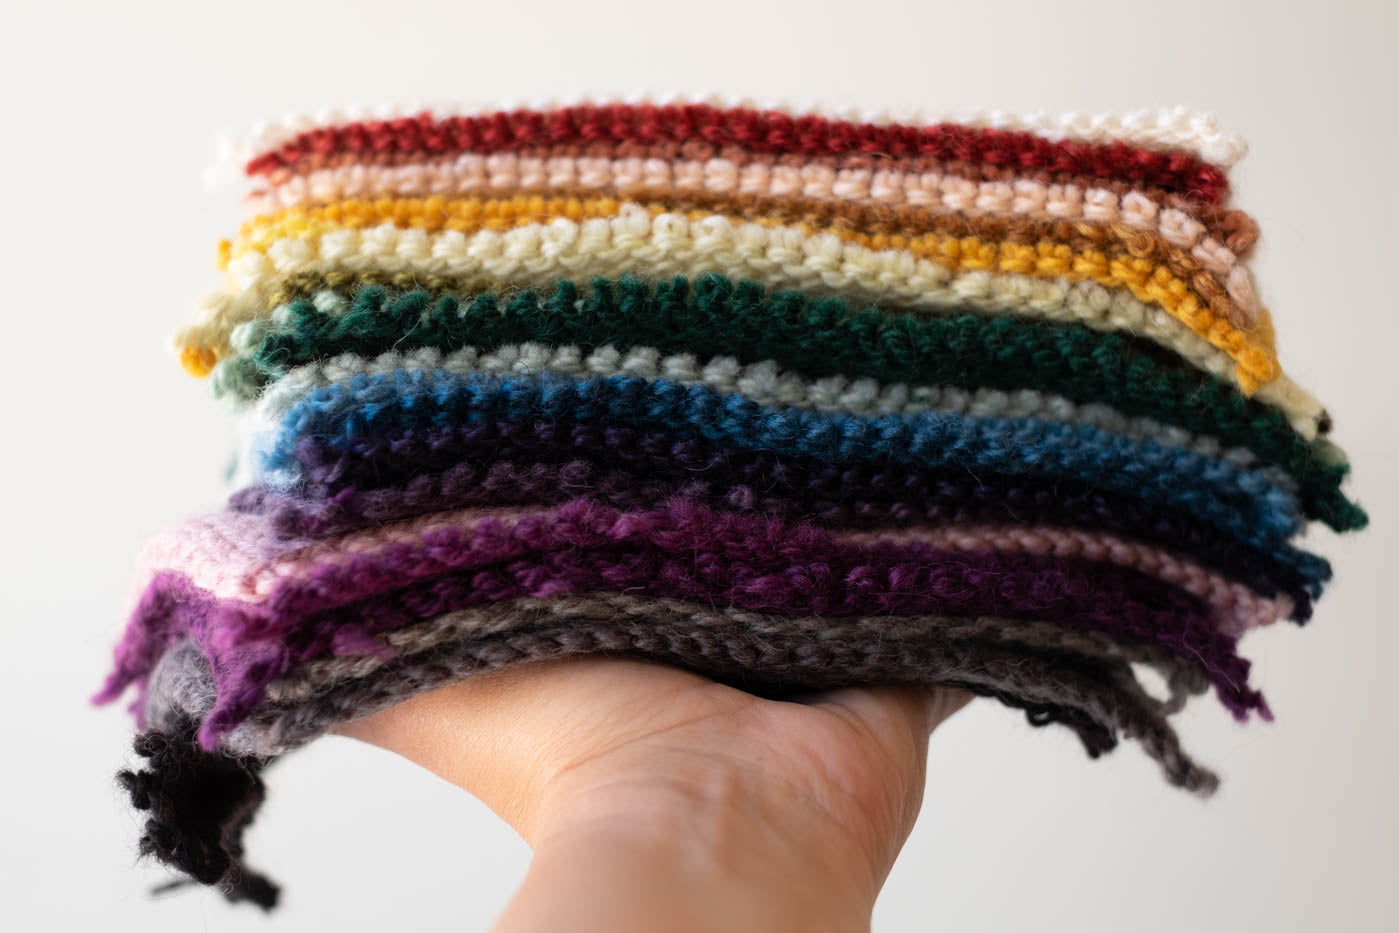 Yarn swatches stacked in a pile in a rainbow pattern being held by a hand straight out from the camera.